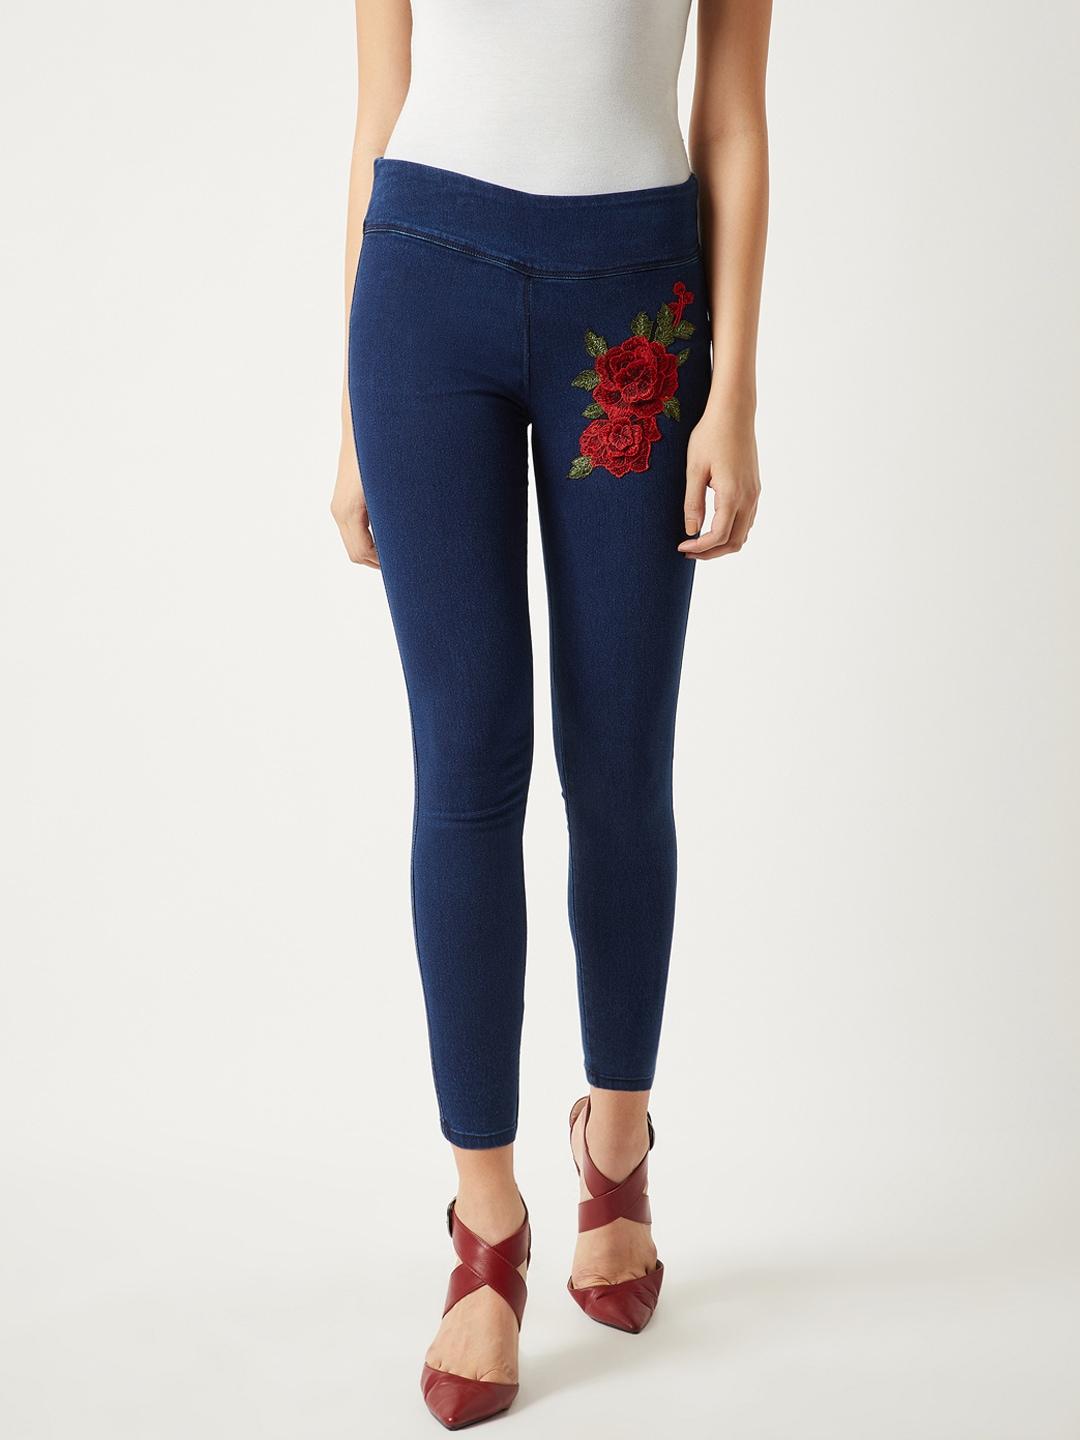 miss-chase-navy-skinny-fit-embroidered-jeggings